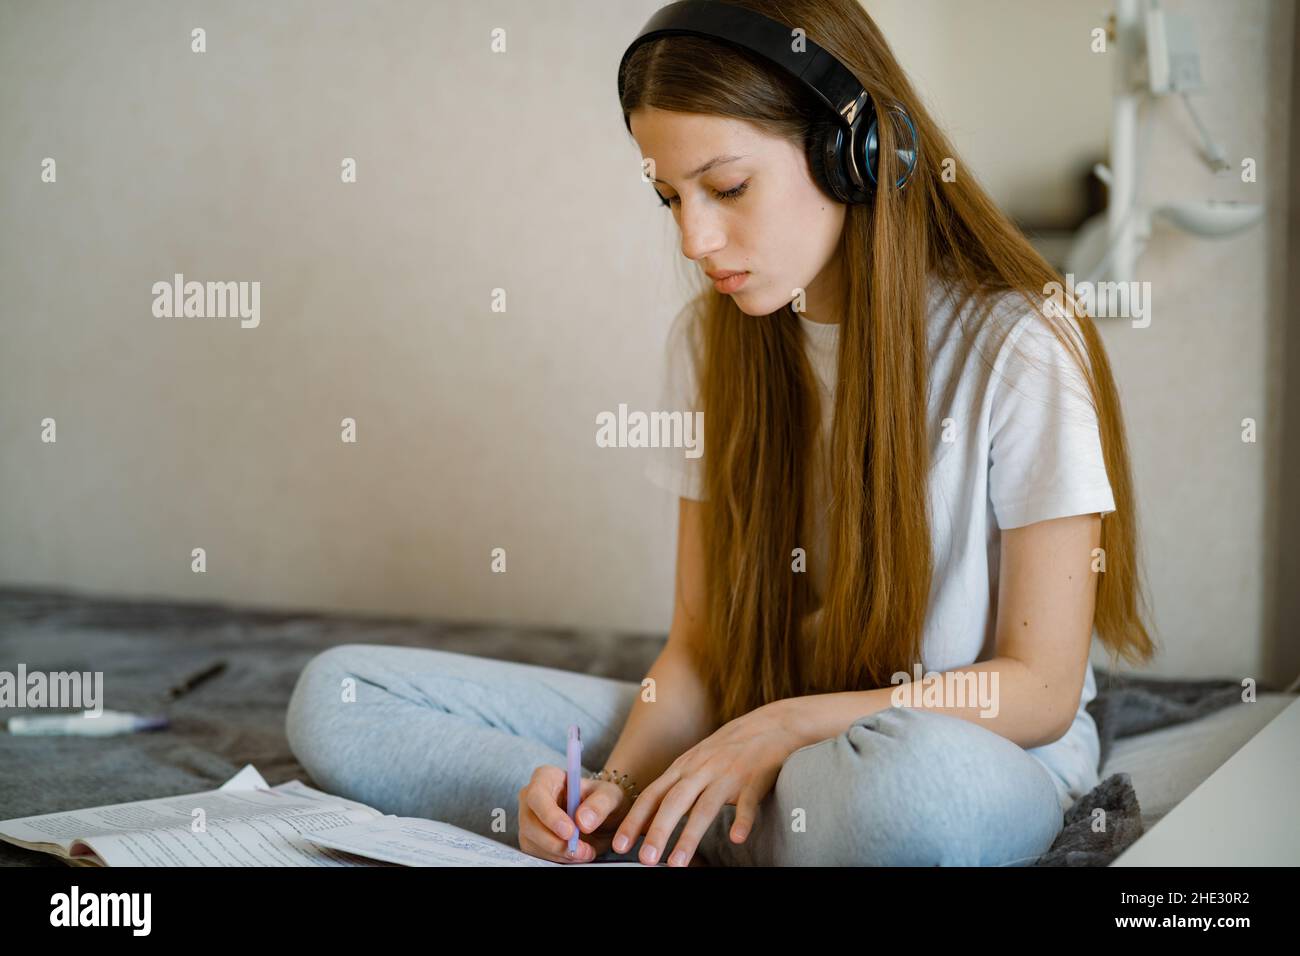 Young teenage girl in headphones does homework, sitting on bed Stock Photo